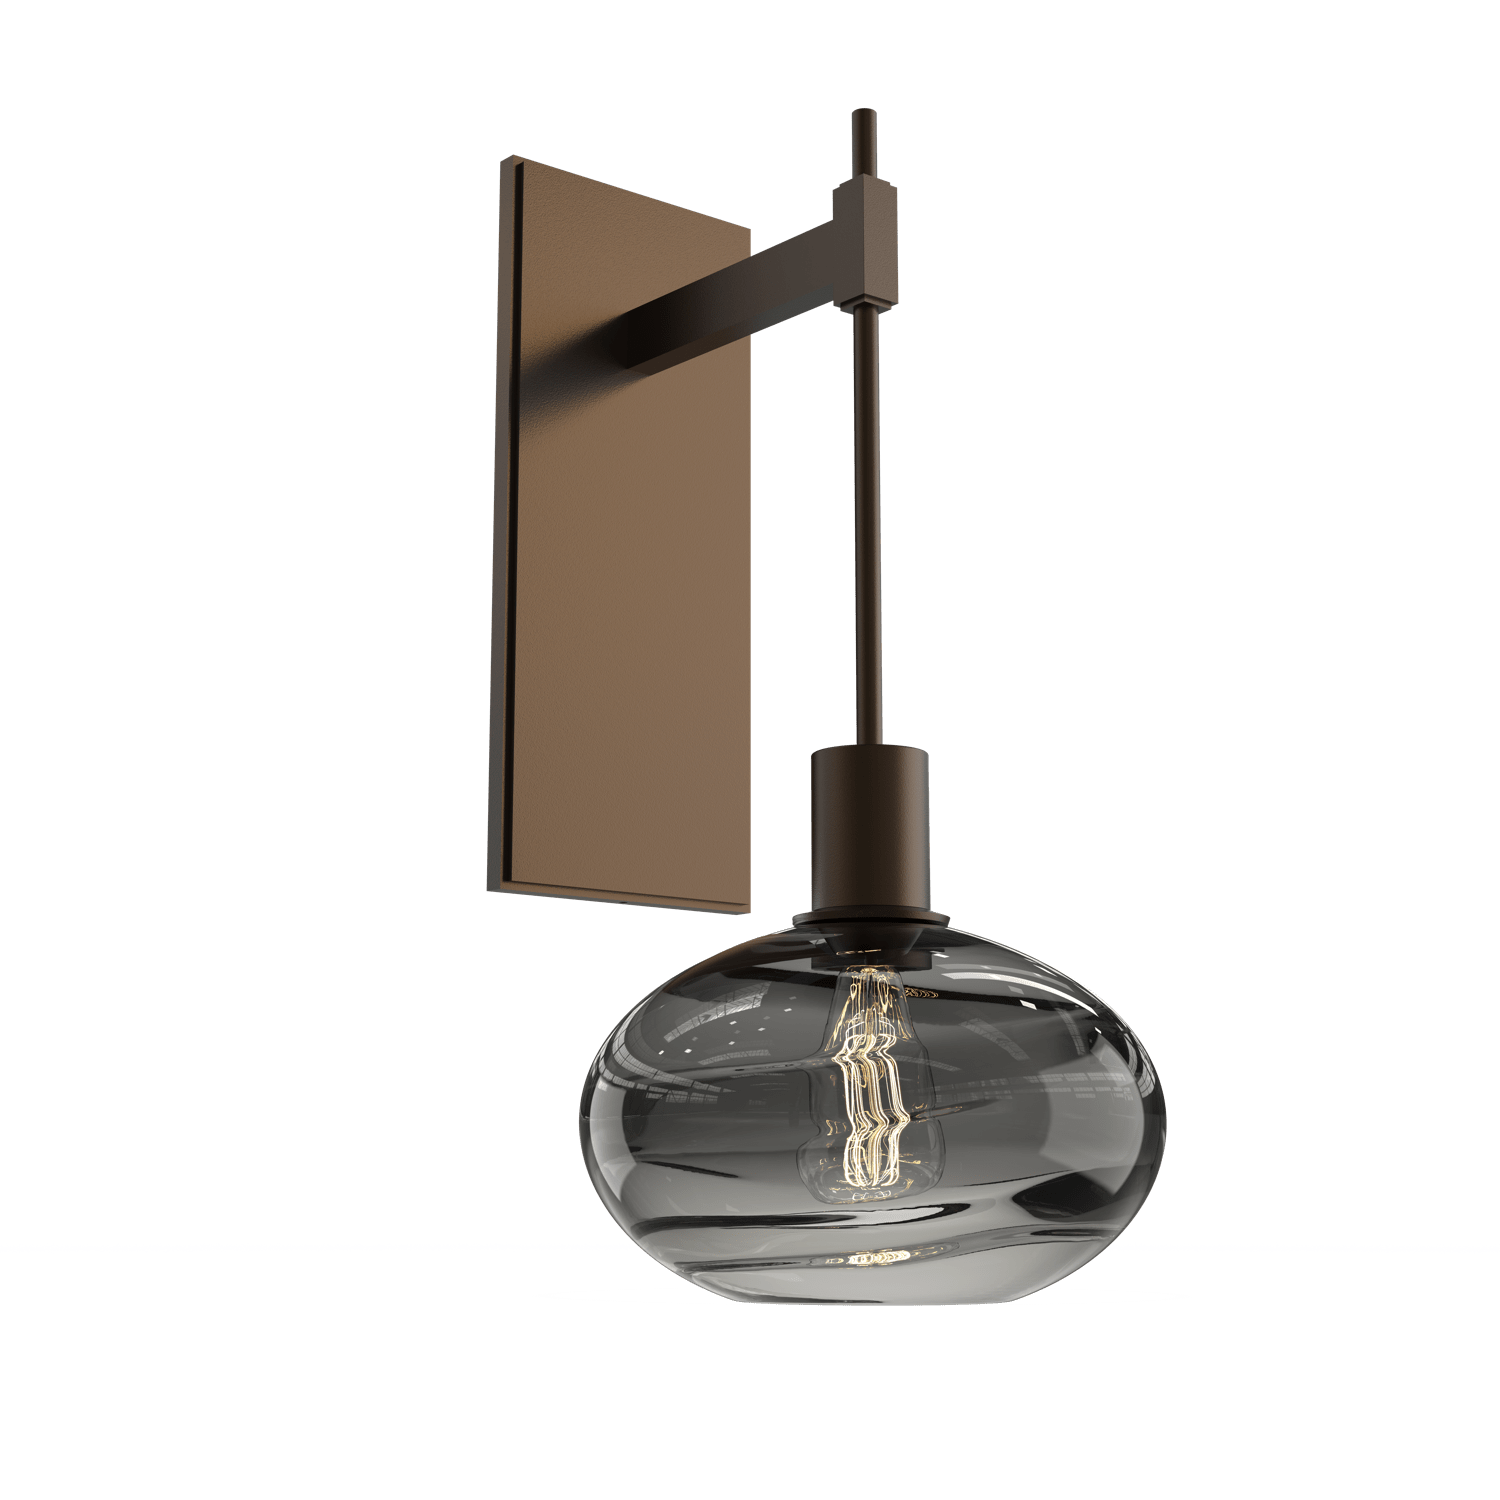 IDB0036-18-FB-OS-Hammerton-Studio-Optic-Blown-Glass-Coppa-tempo-wall-sconce-with-flat-bronze-finish-and-optic-smoke-blown-glass-shades-and-incandescent-lamping